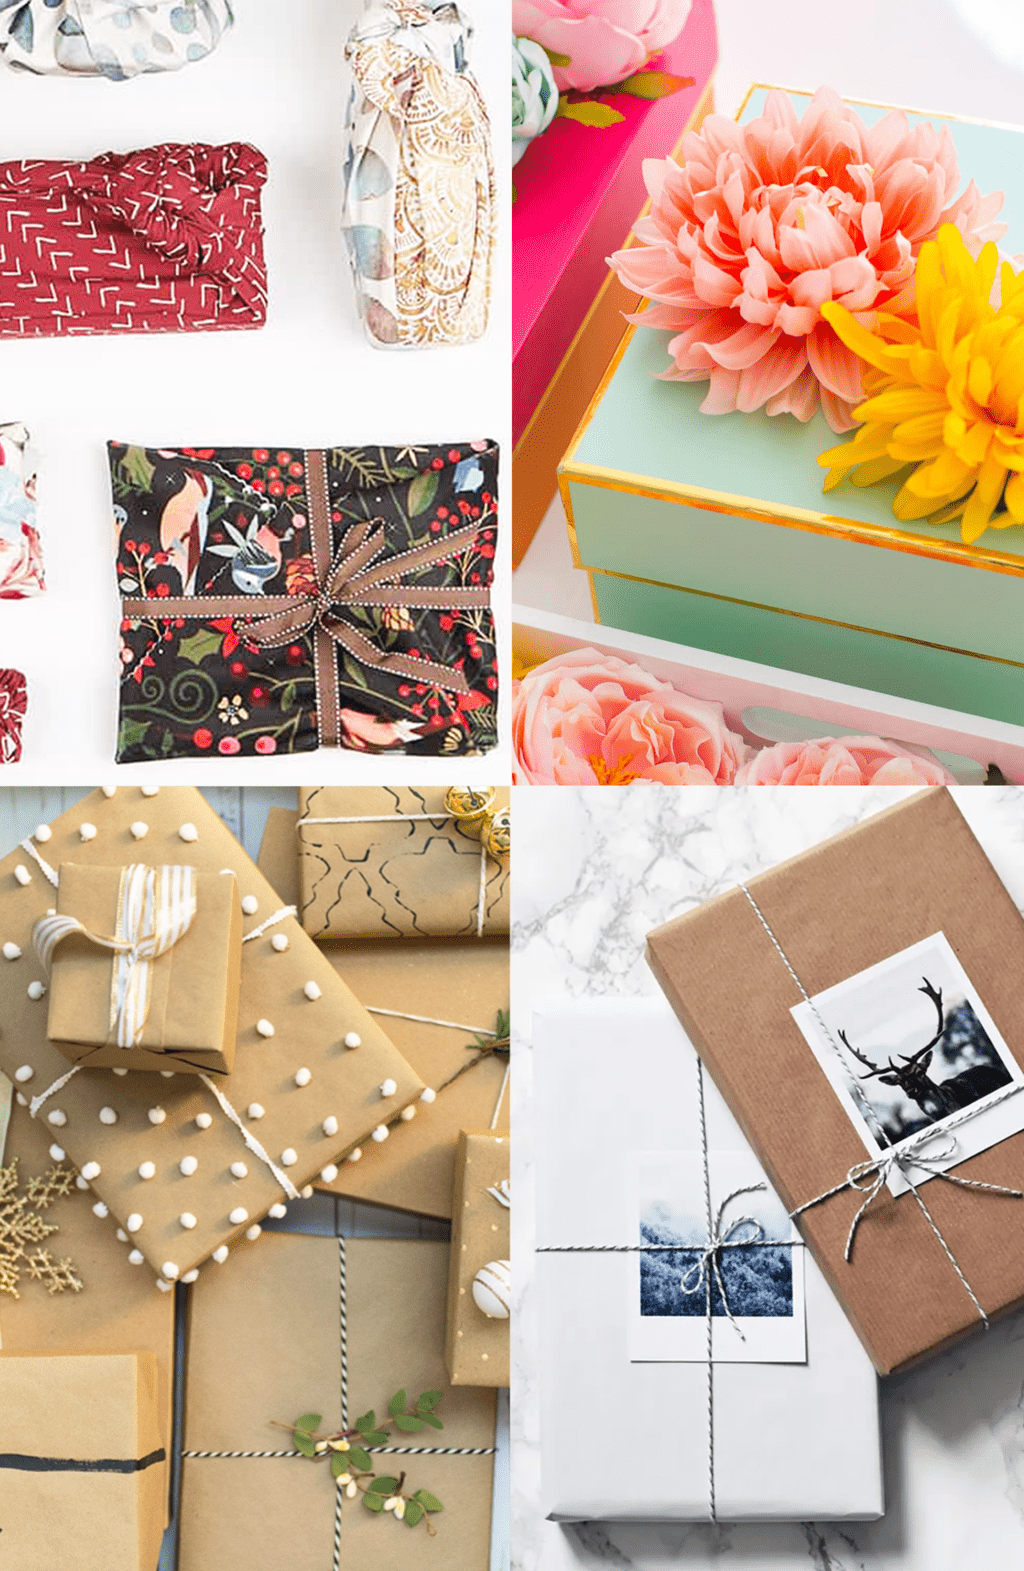 10 DIY Gift Wrap No Wrapping Paper Ideas